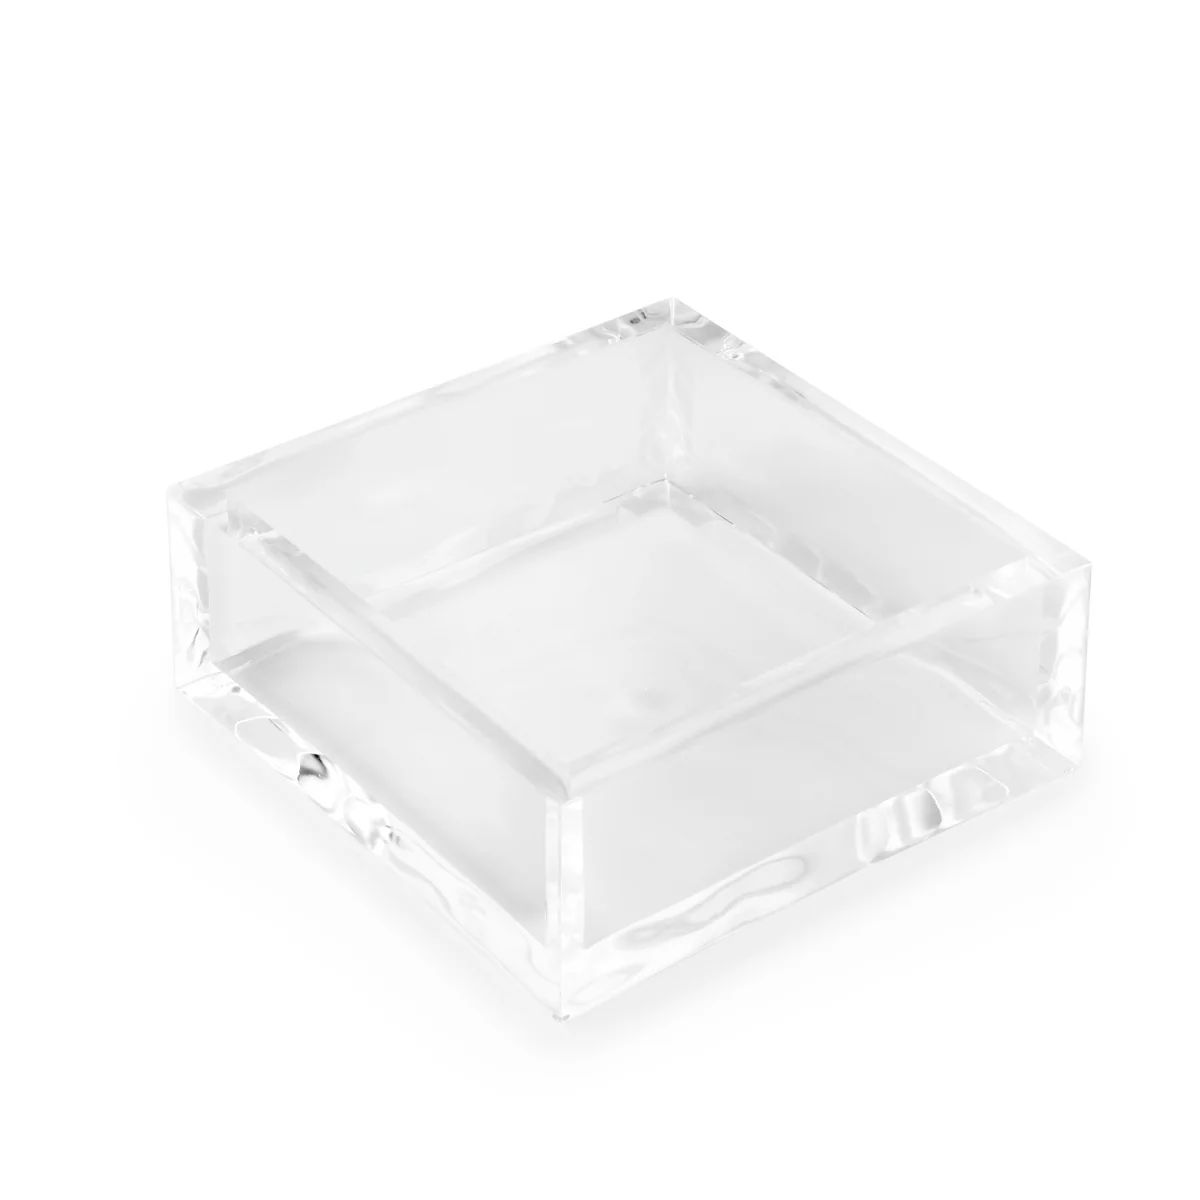 DELUXE 6.5x6.5 DINNER NAPKIN HOLDER TRAY (10MM THICK) | Clear Home Decor